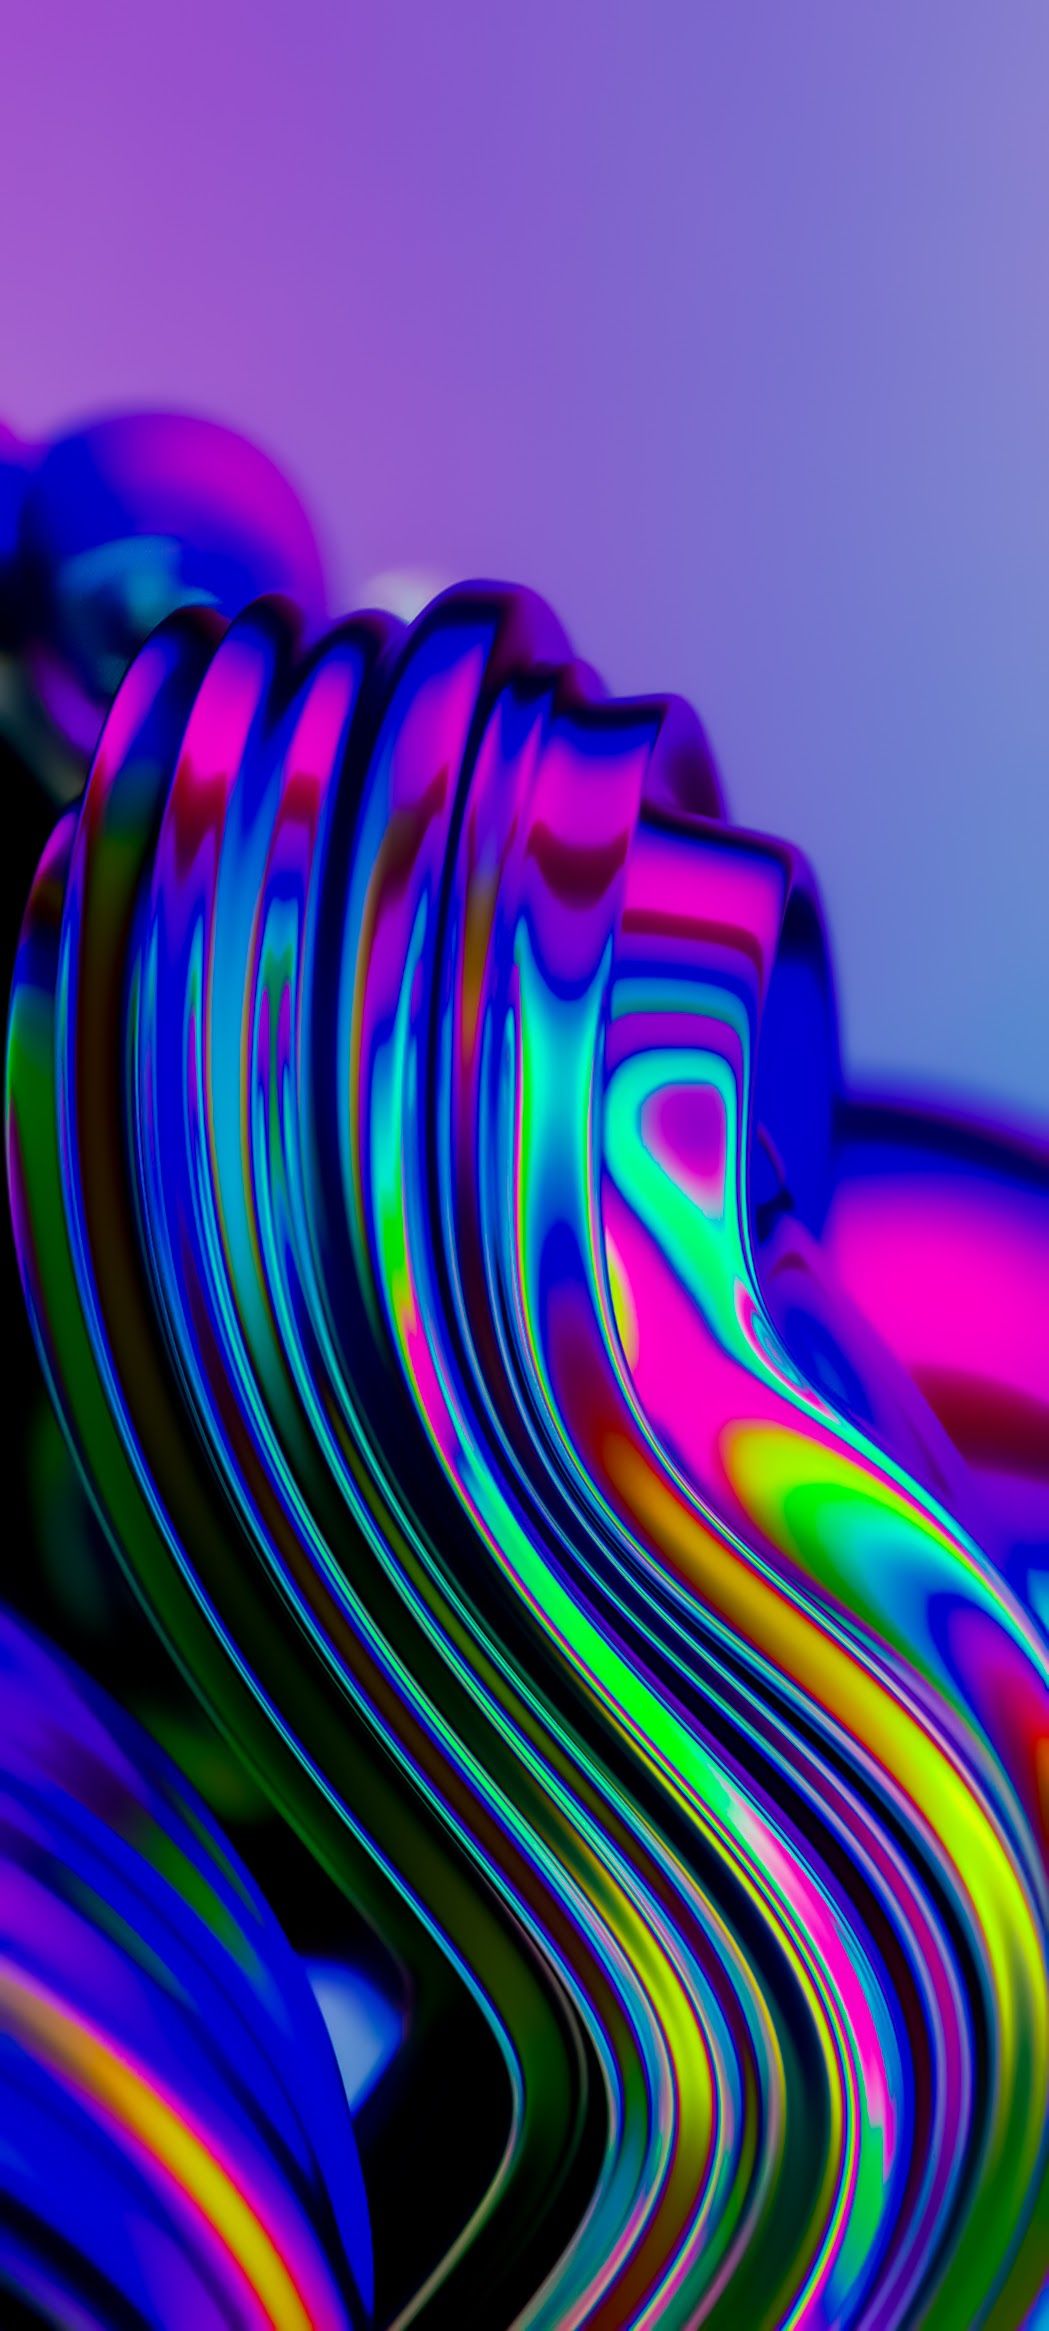 A photo of a colorful abstract art piece - Iridescent